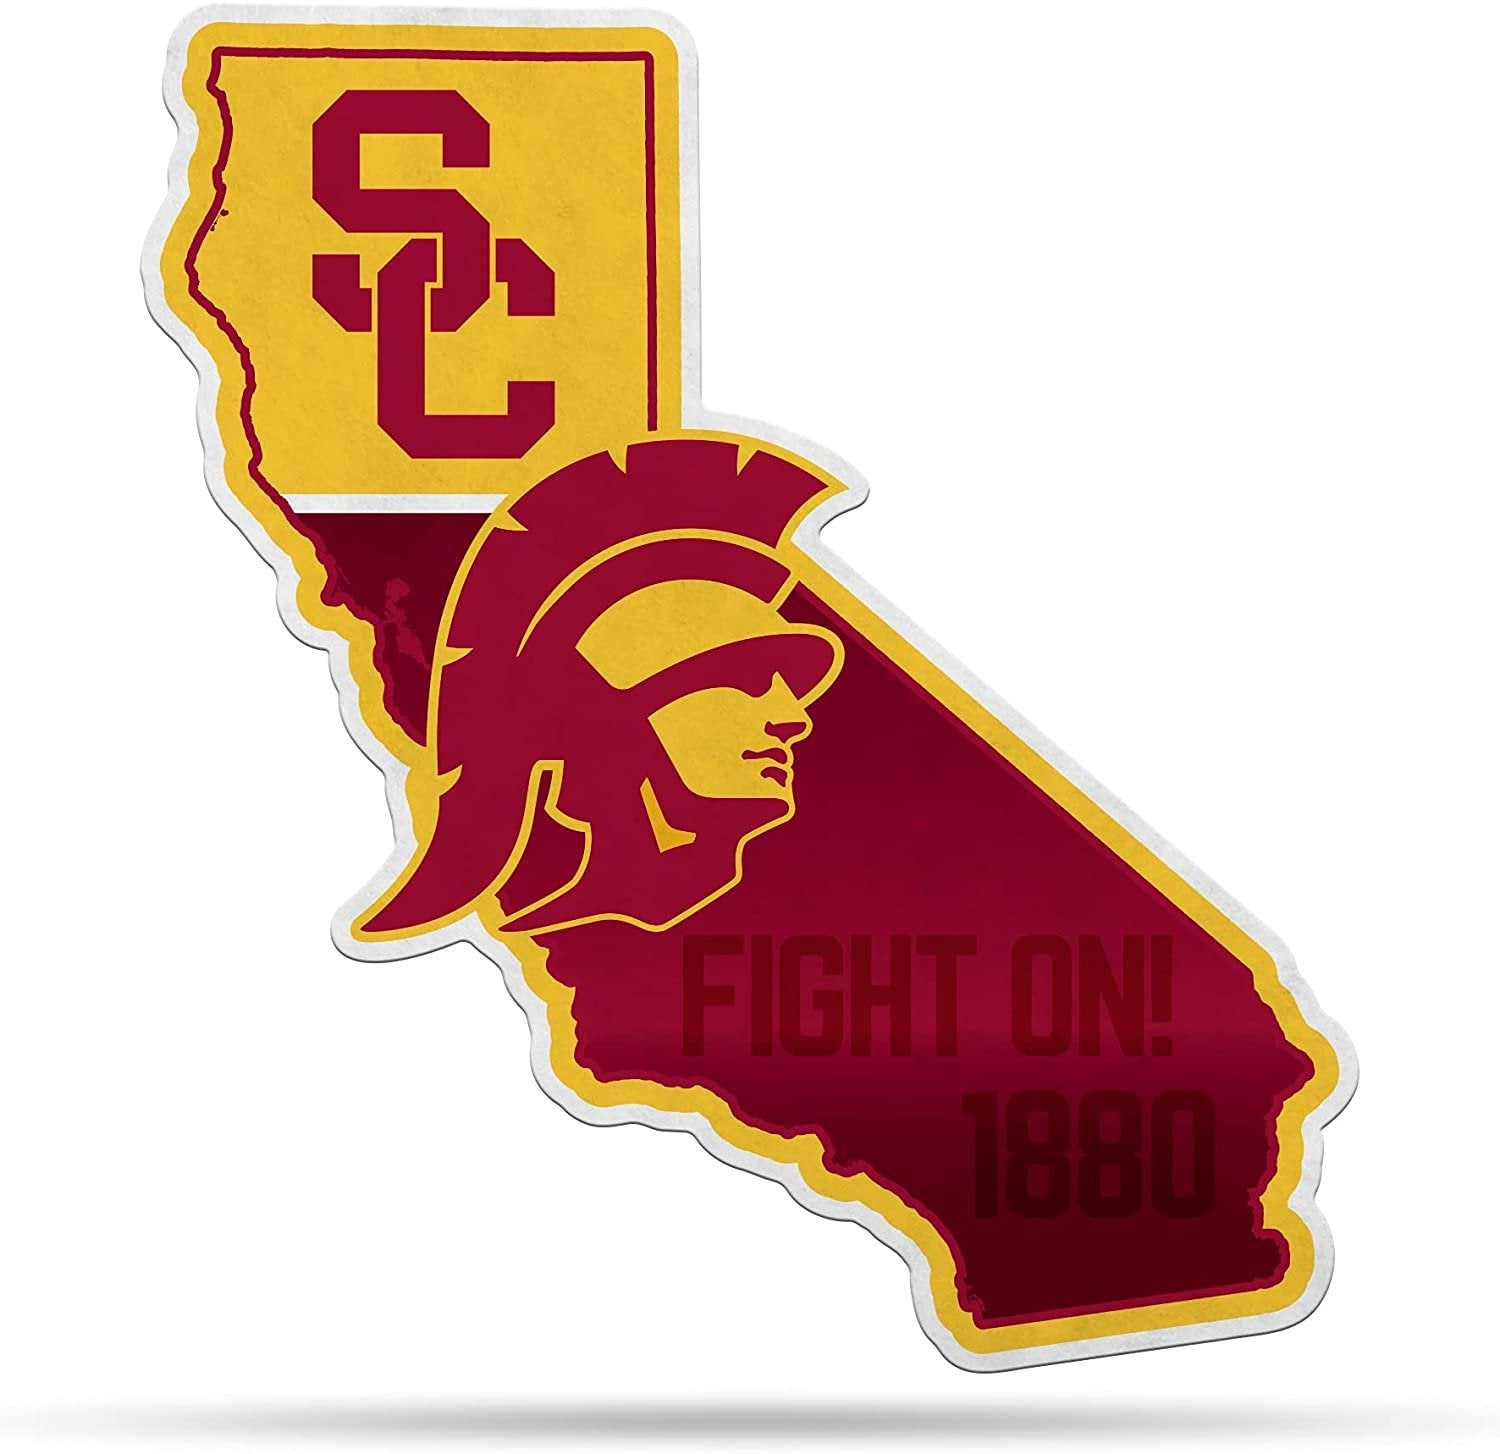 University of Southern California USC Trojans Soft Felt Pennant, State Design, Shape Cut, 18 Inch, Easy To Hang